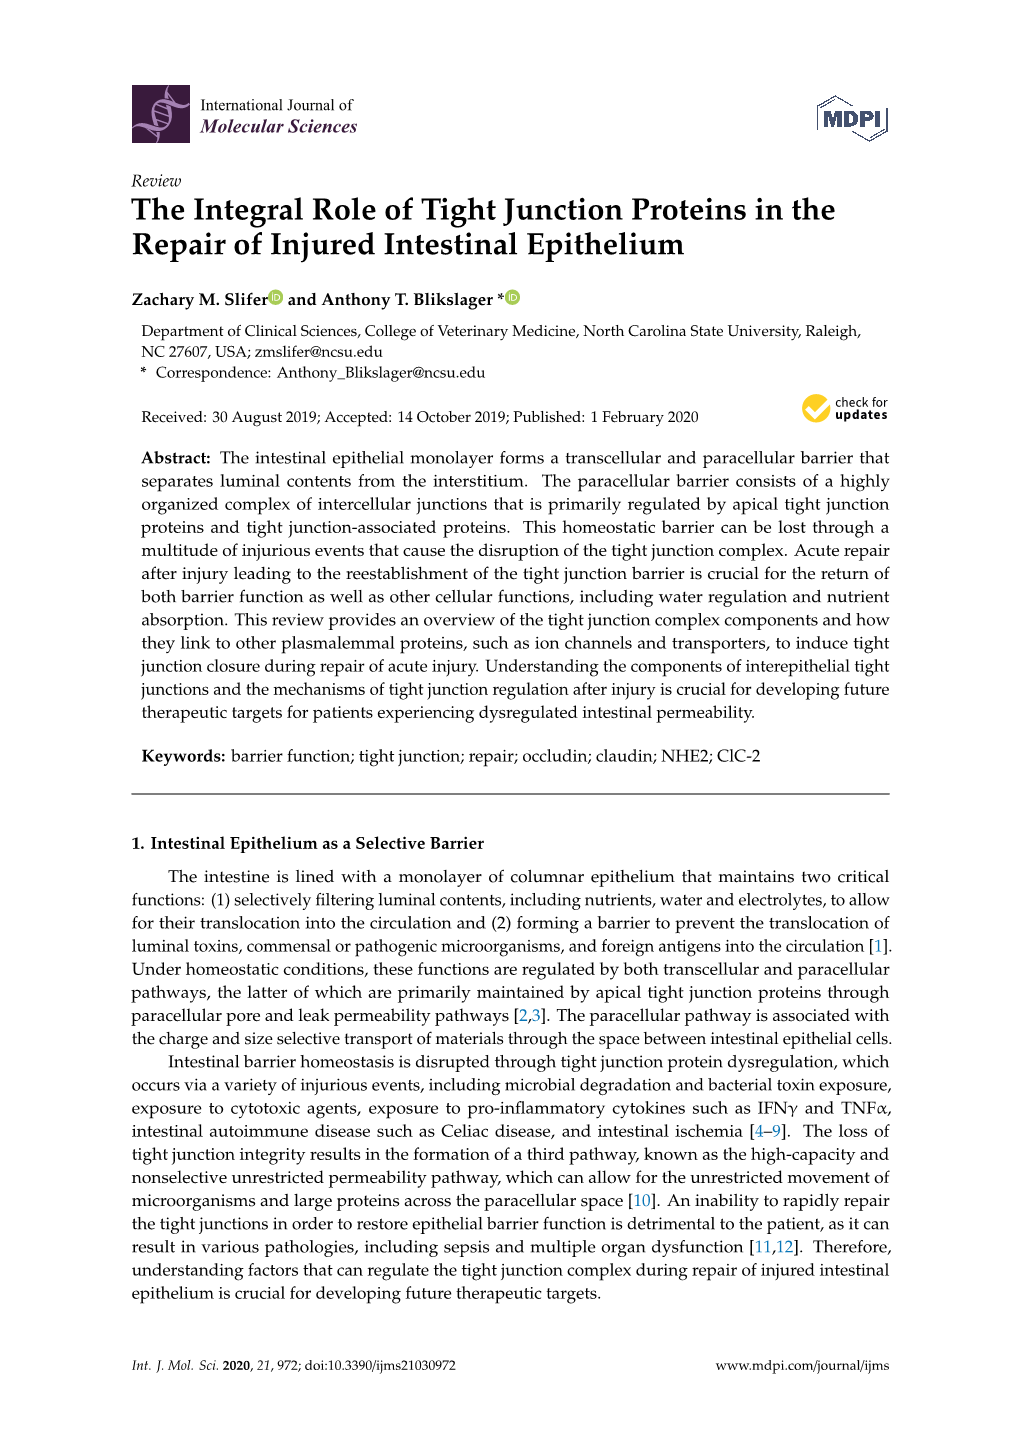 The Integral Role of Tight Junction Proteins in the Repair of Injured Intestinal Epithelium